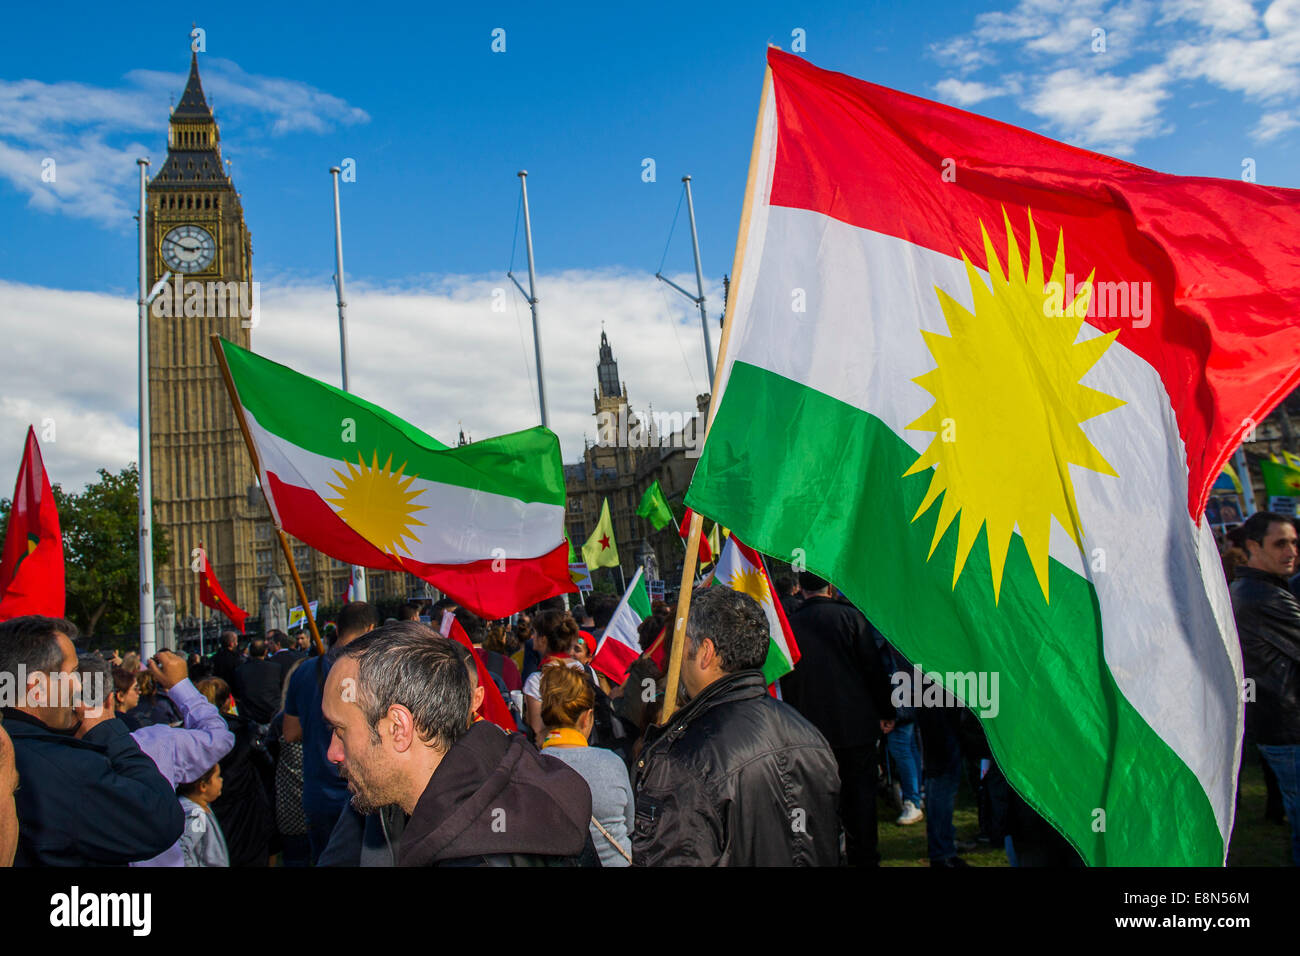 London, UK. 11th Oct, 2014. A protest demanding support for the Kurds and blaming Turkey for not helping is generally peaceful. Although a bungled stop and search kicks off a confrontation that leads to a few arrests. Calm is restored, at least temporarily when Kurdish stewards form a barrier between the protestors and the police lines. Parliament Square, London 11 Oct 2014. Credit:  Guy Bell/Alamy Live News Stock Photo